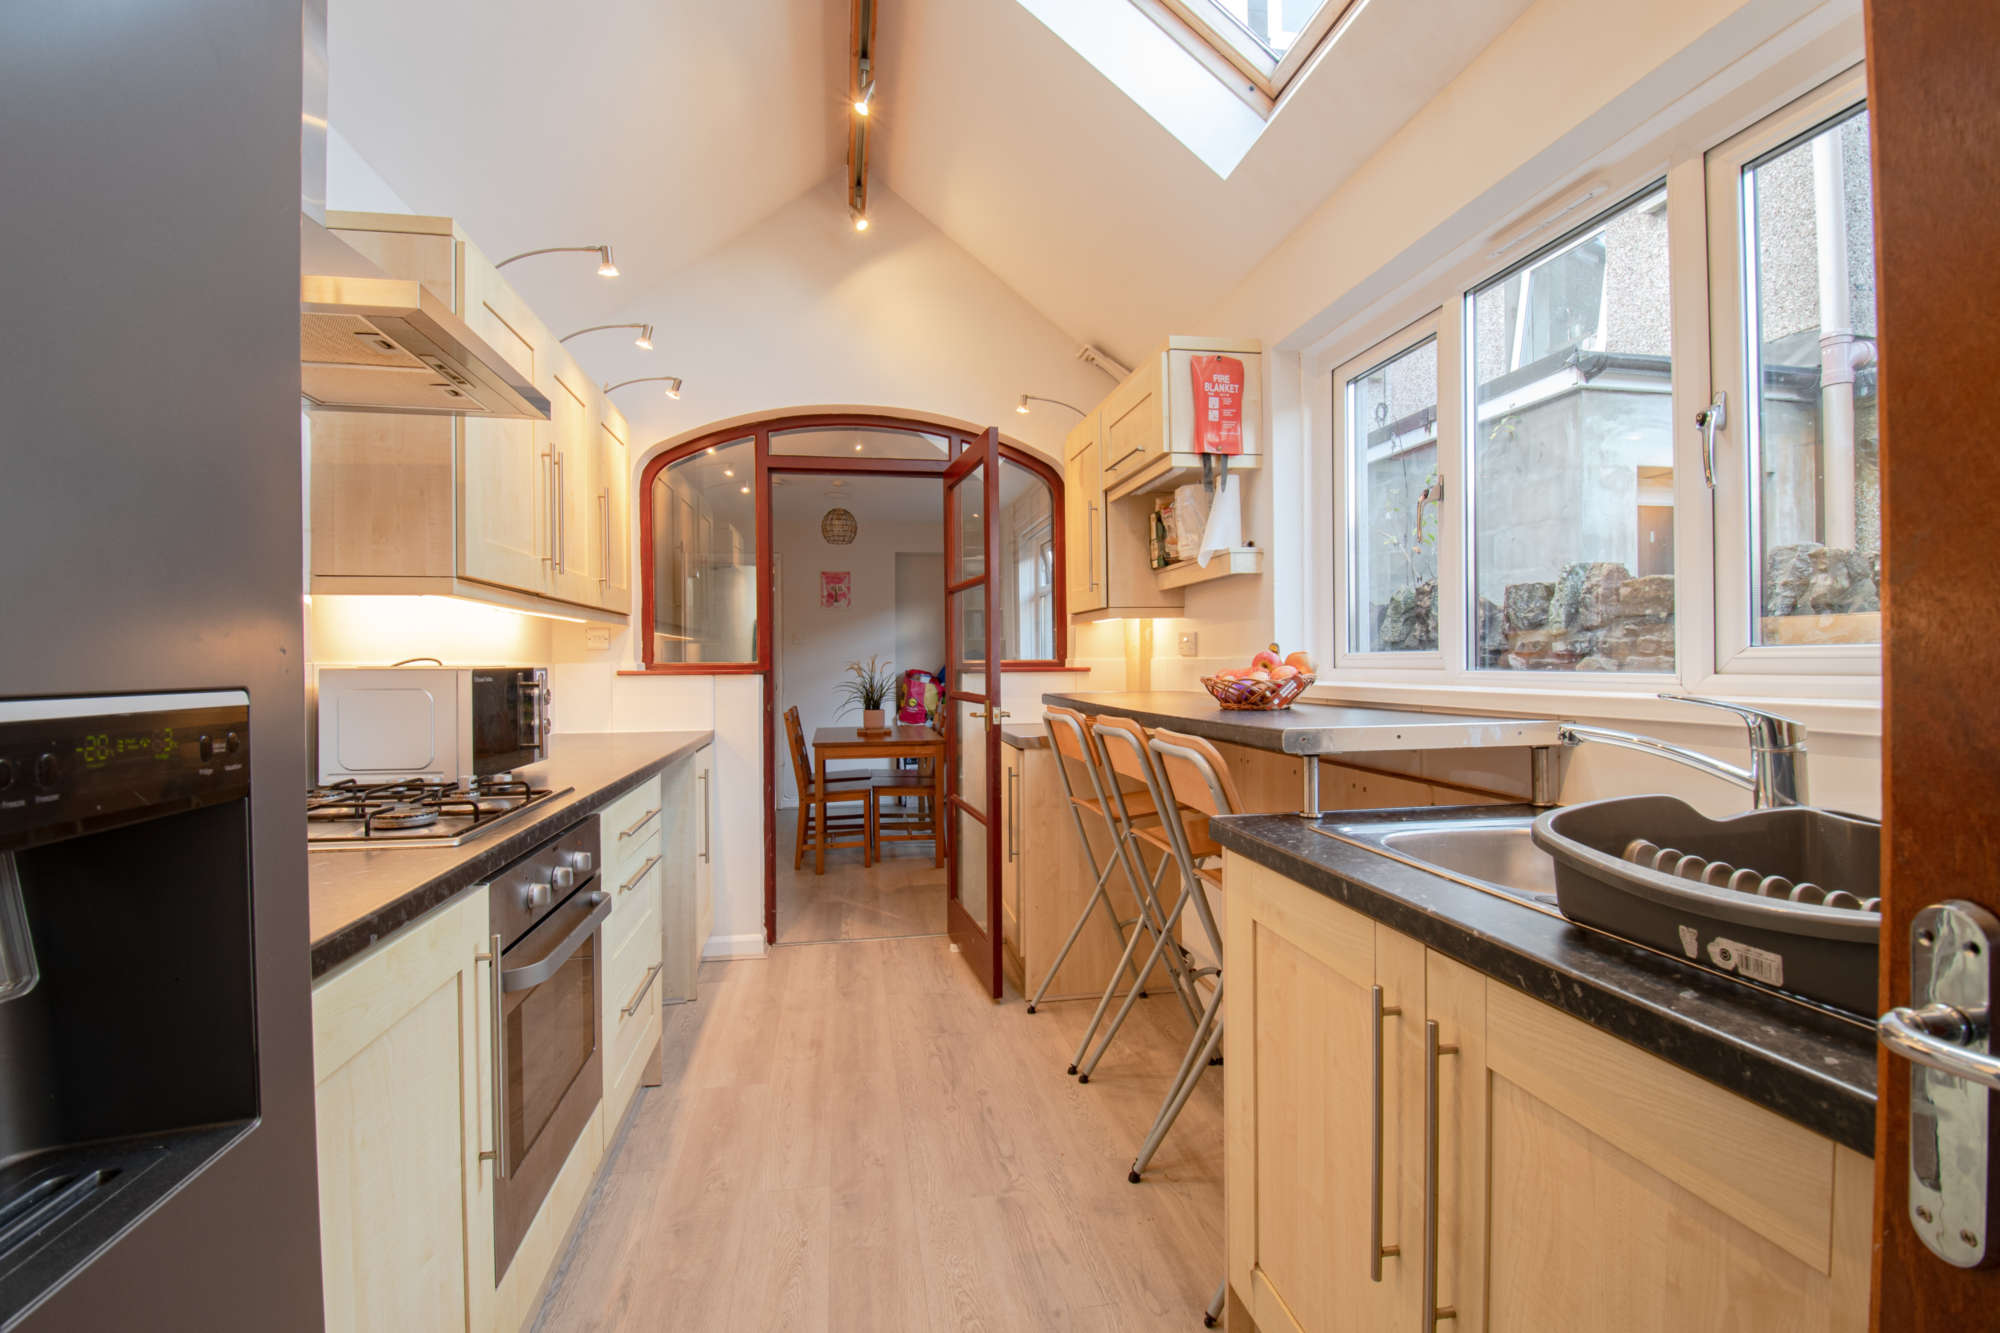 Kitchen with large skylight